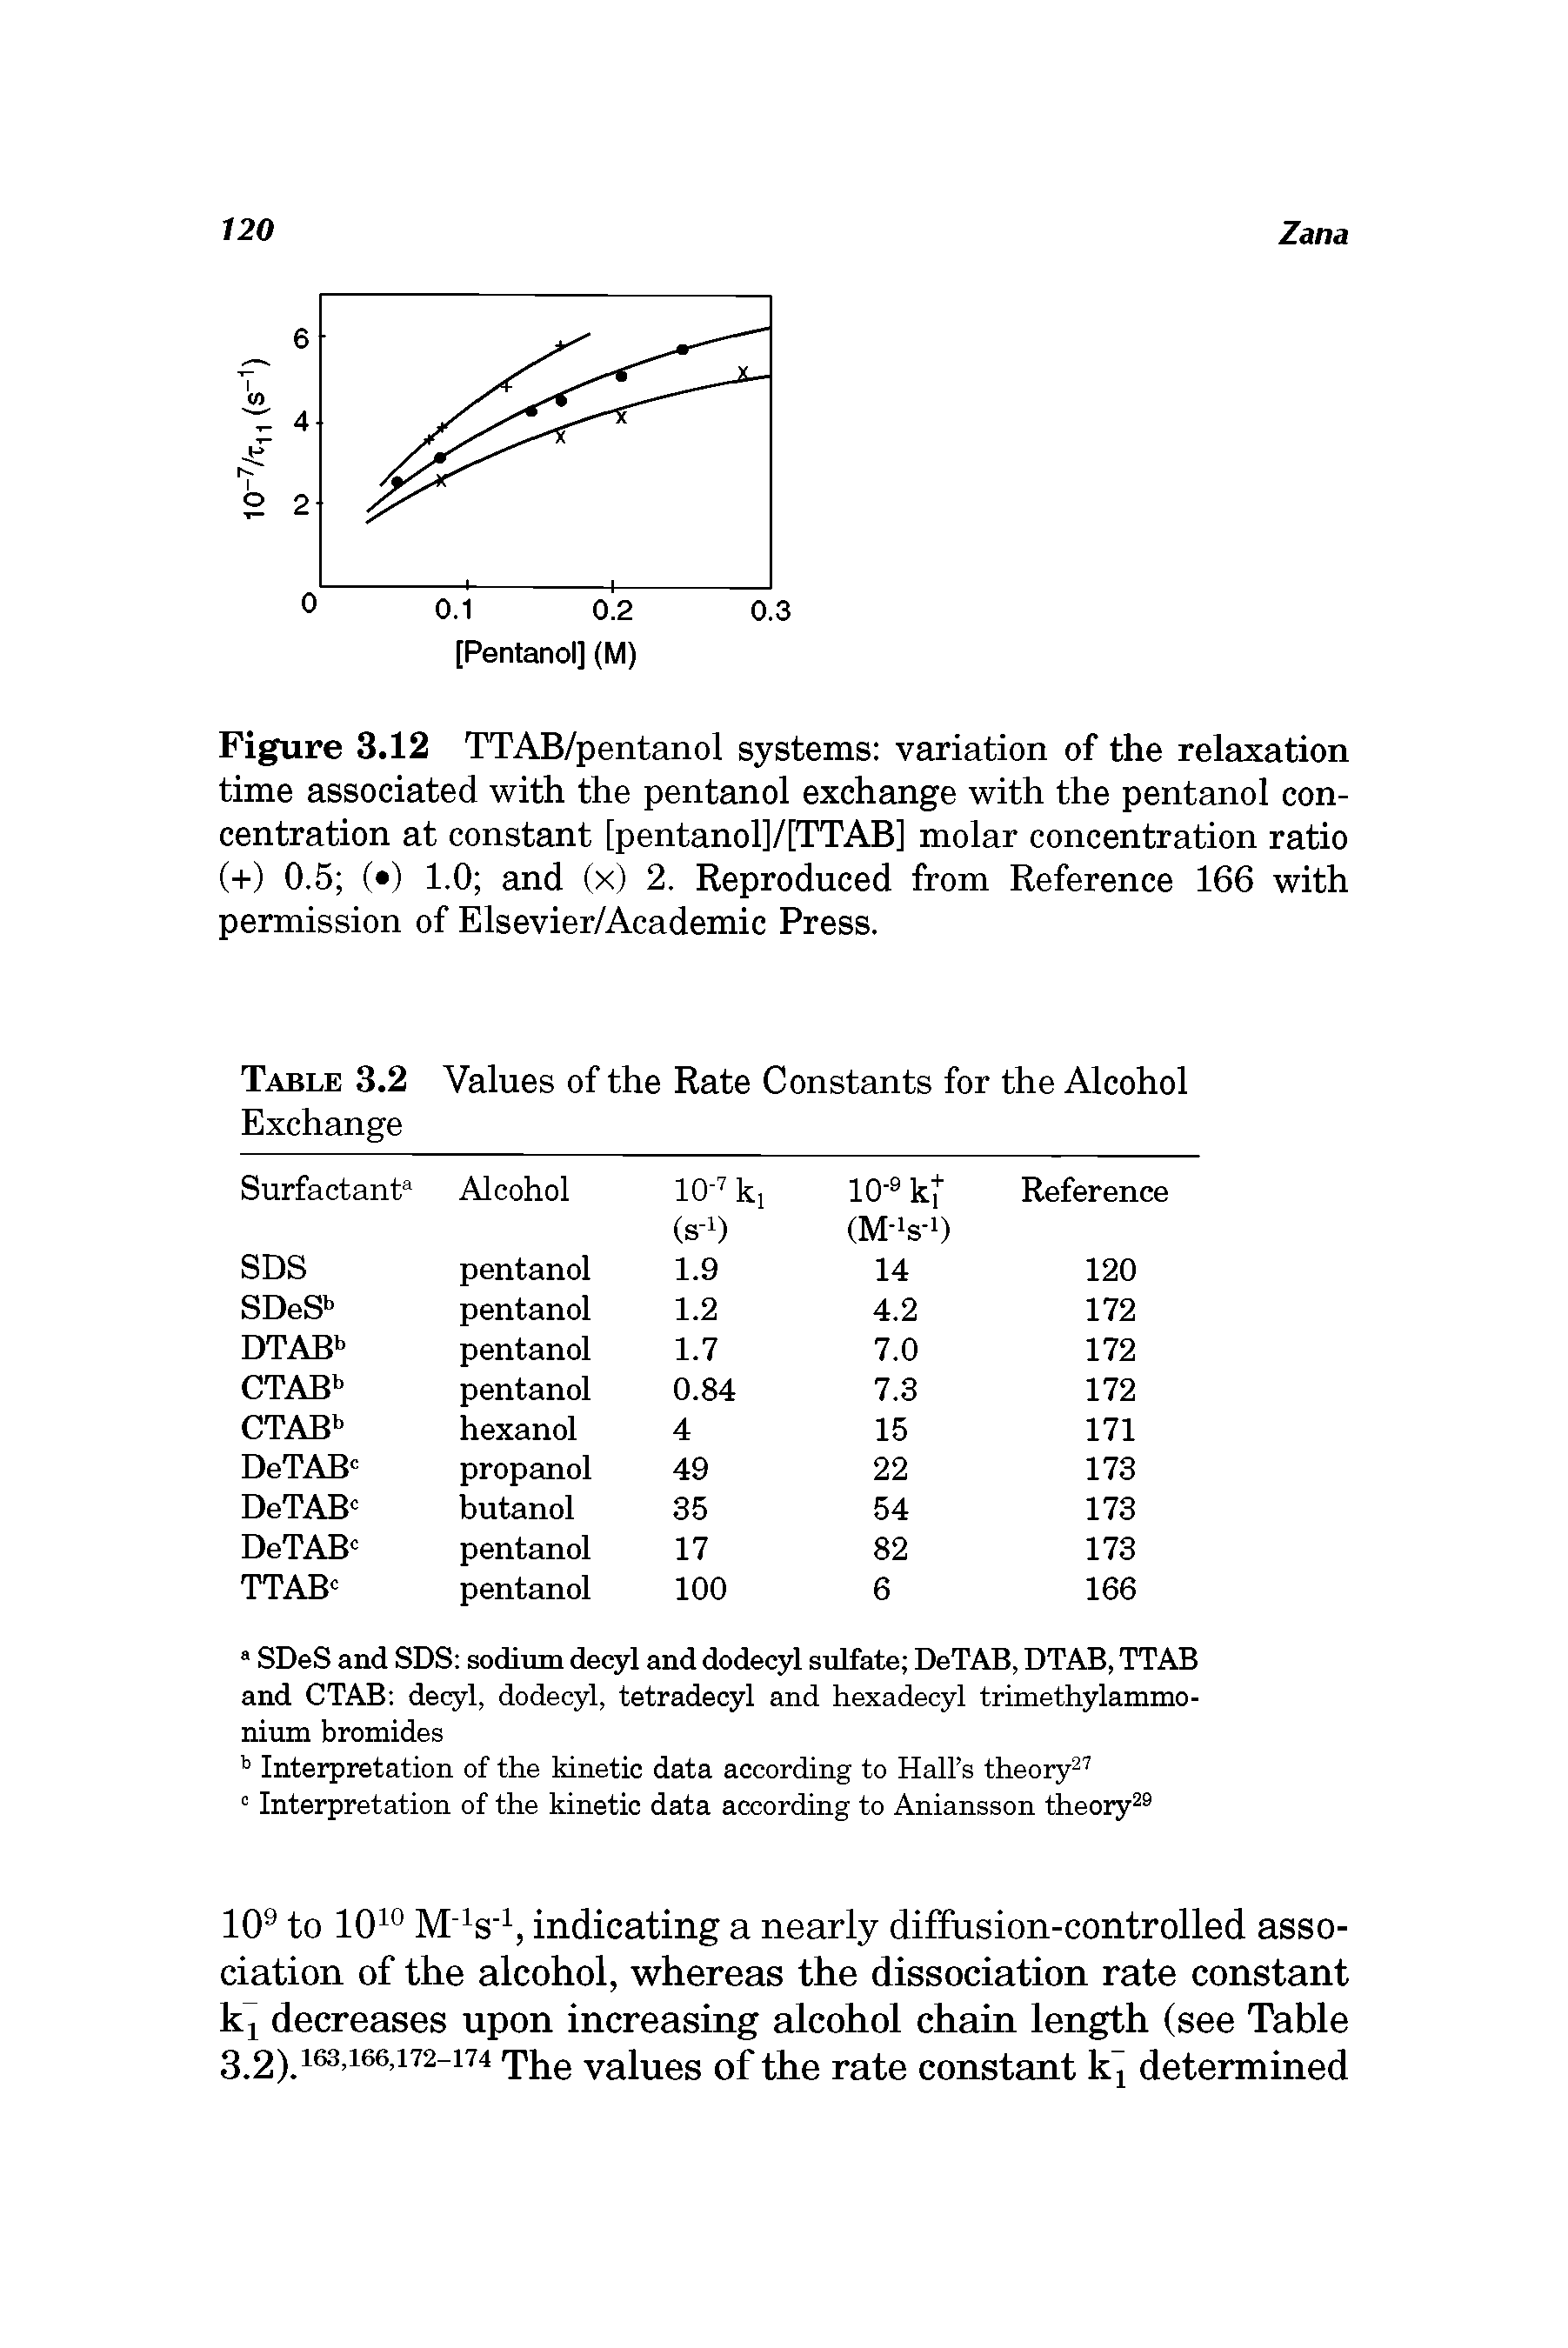 Figure 3.12 TTAB/pentanol systems variation of the relaxation time associated with the pentanol exchange with the pentanol concentration at constant [pentanol]/[TTAB] molar concentration ratio (+) 0.5 ( ) 1.0 and (x) 2. Reproduced from Reference 166 with permission of Elsevier/Academic Press.